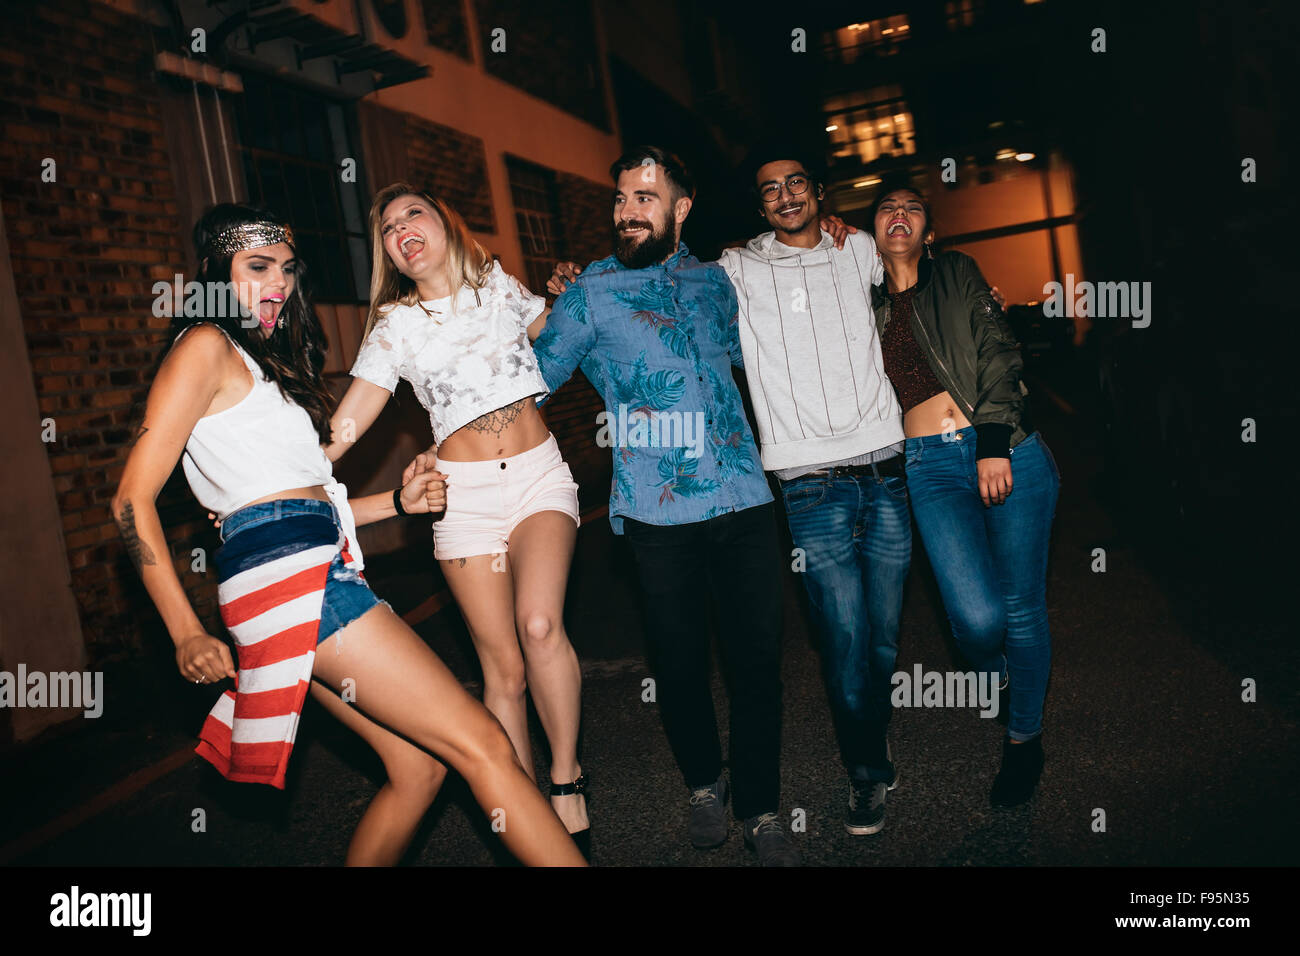 Cheerful young people walking together at night and having fun. Multiracial group of friends hanging out in evening. Stock Photo